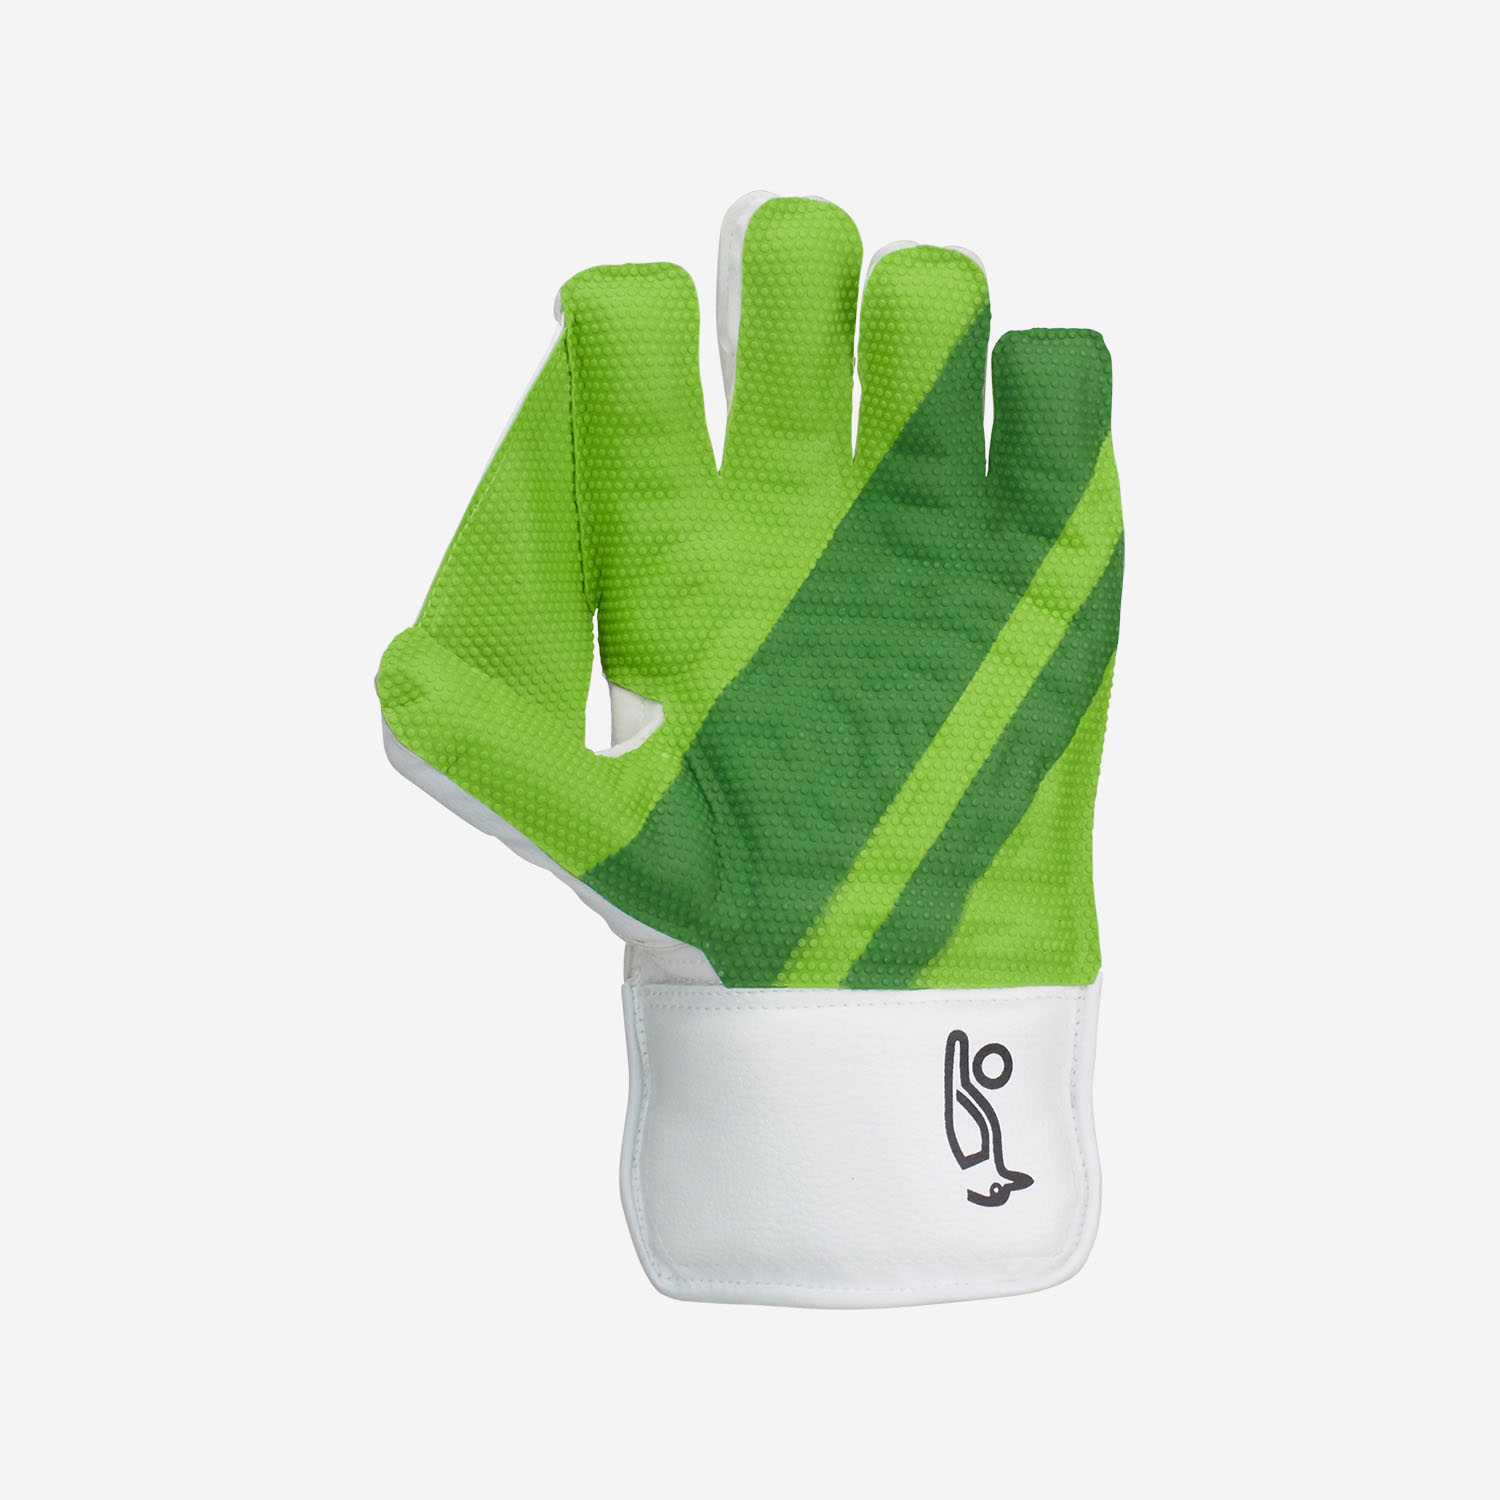 LC 4.0 WICKET KEEPING GLOVE